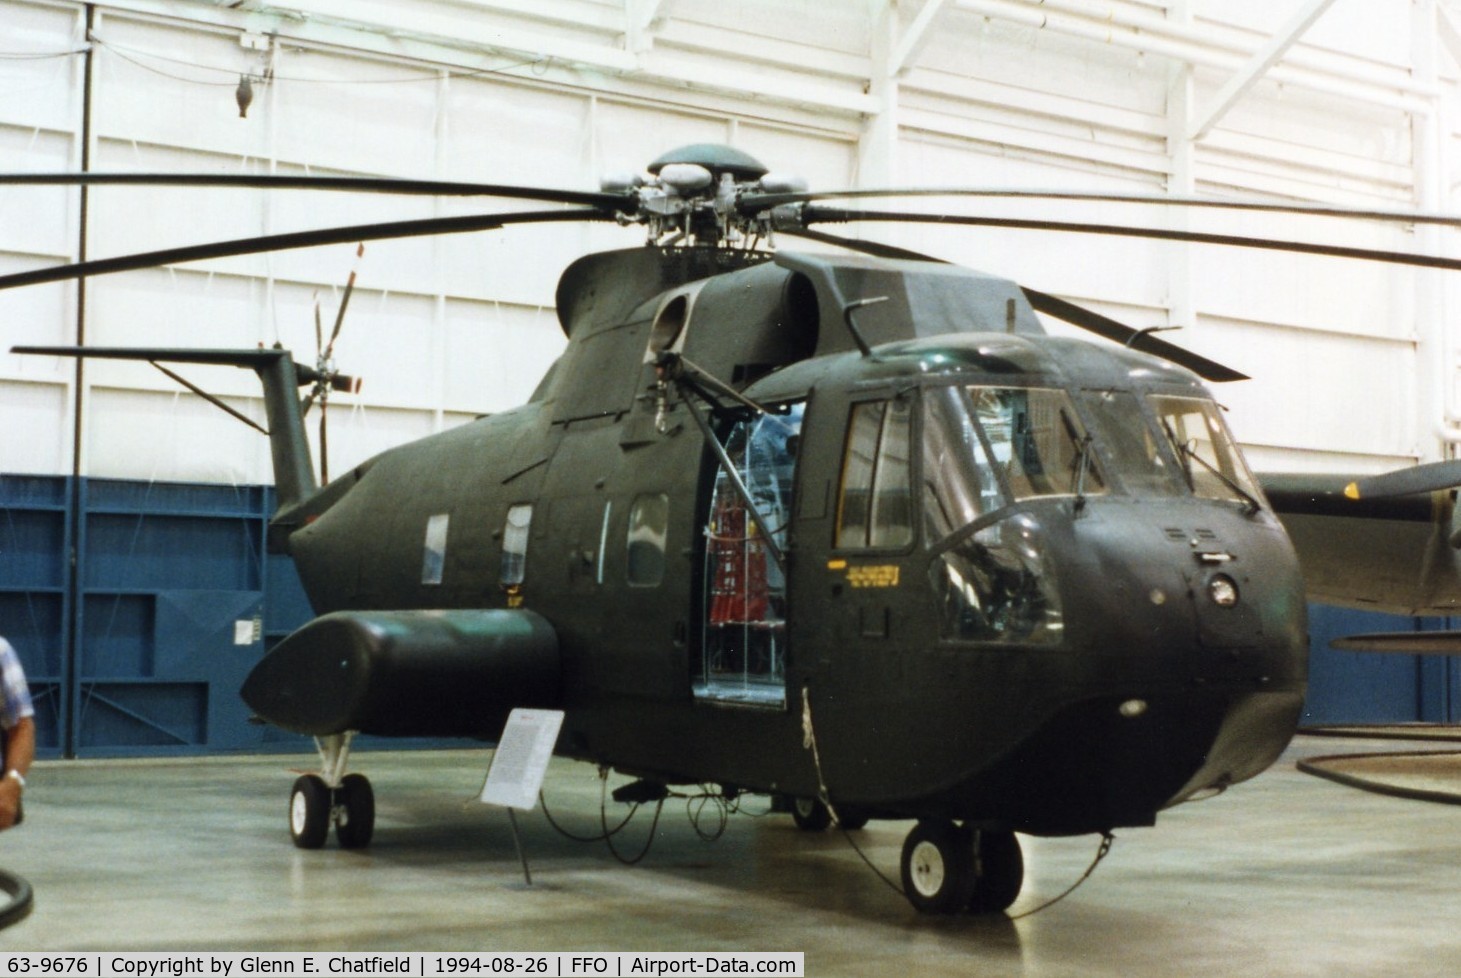 63-9676, 1963 Sikorsky CH-3E Jolly Green Giant C/N 61-508, CH-3E at the National Museum of the U.S. Air Force